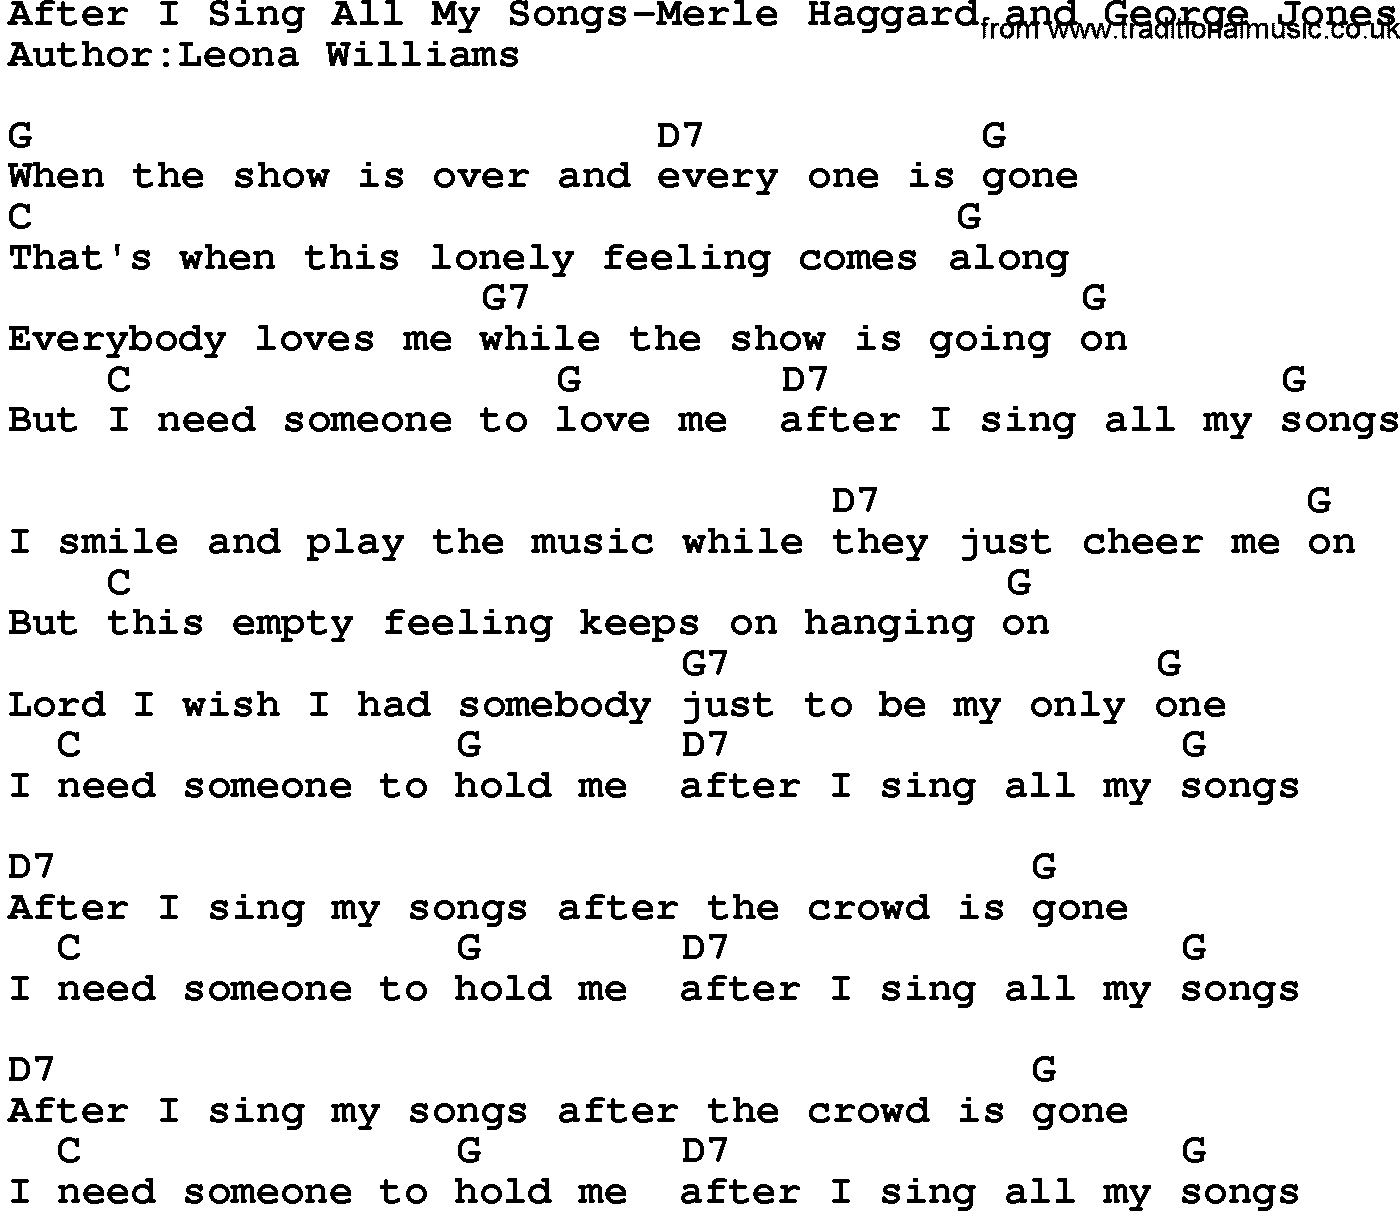 Country music song: After I Sing All My Songs-Merle Haggard And George Jones lyrics and chords